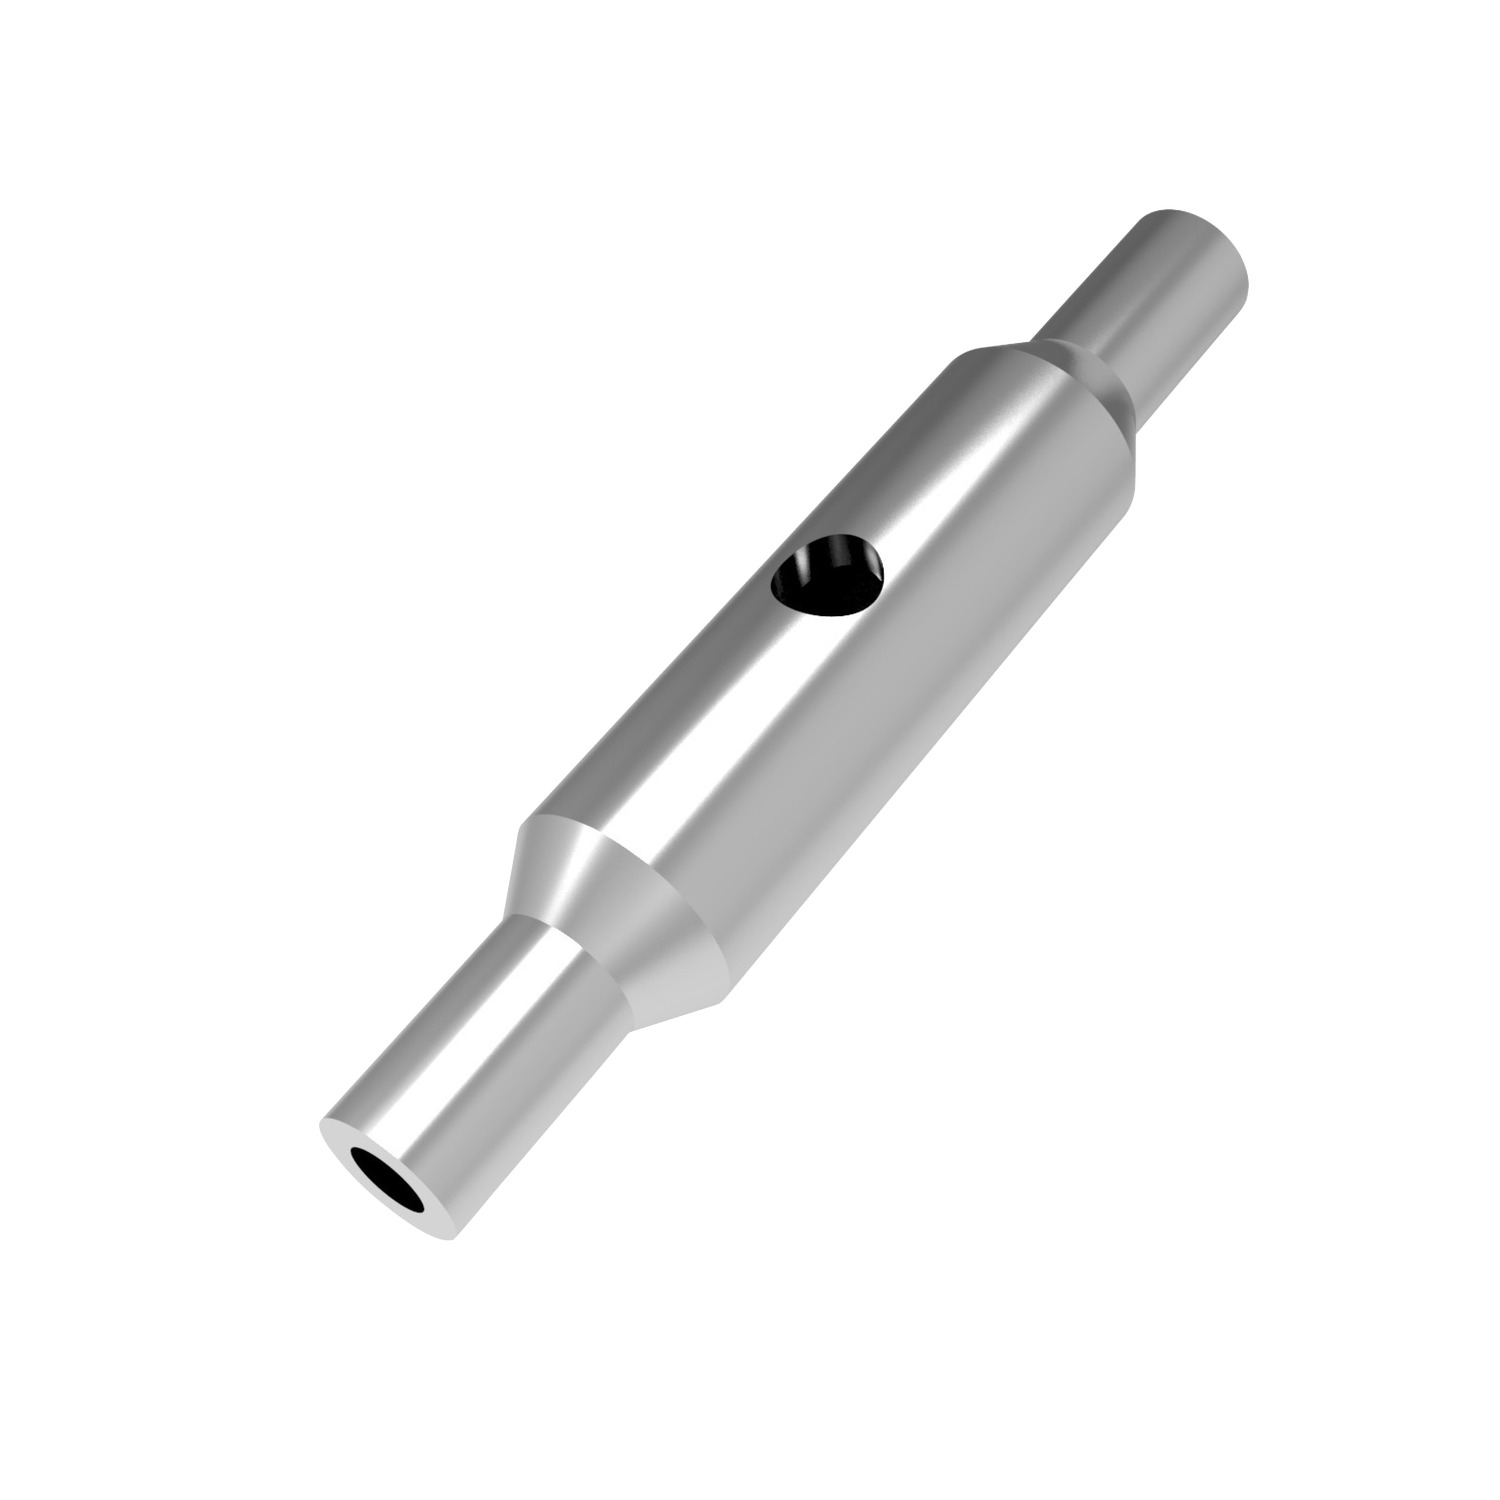 Pipe Body Turnbuckles A4 Stainless steel turnbuckles with pipe body. Manufactured to DIN 1478. Sizes ranging from M6 to M36. Lengths from 110mm to 295mm.